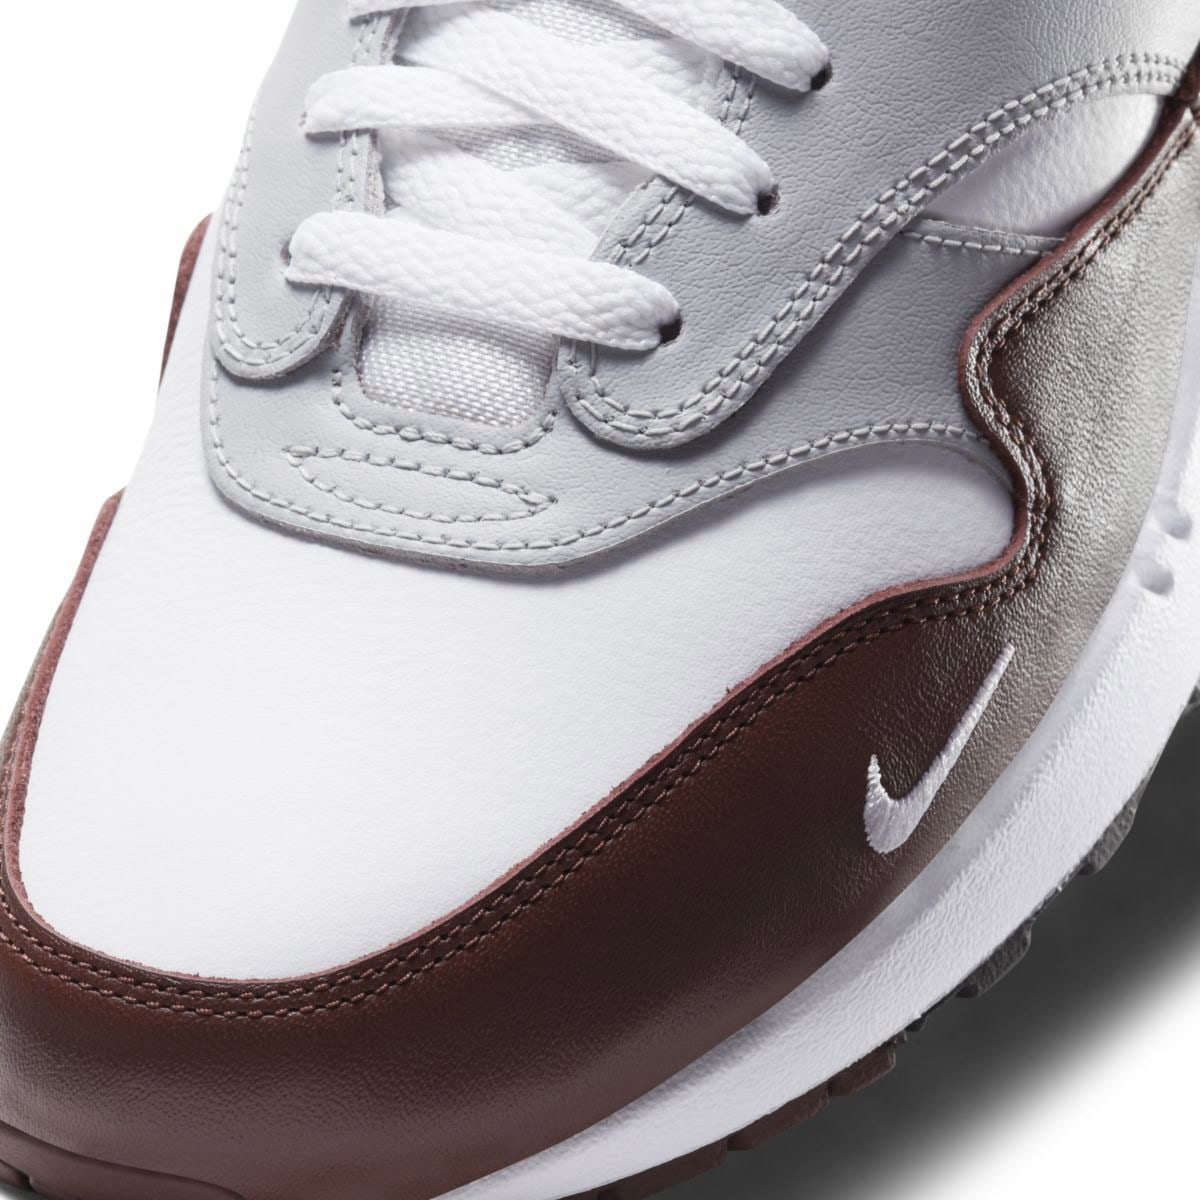 nike air max 1 leather white grey brown DB5074-101 6